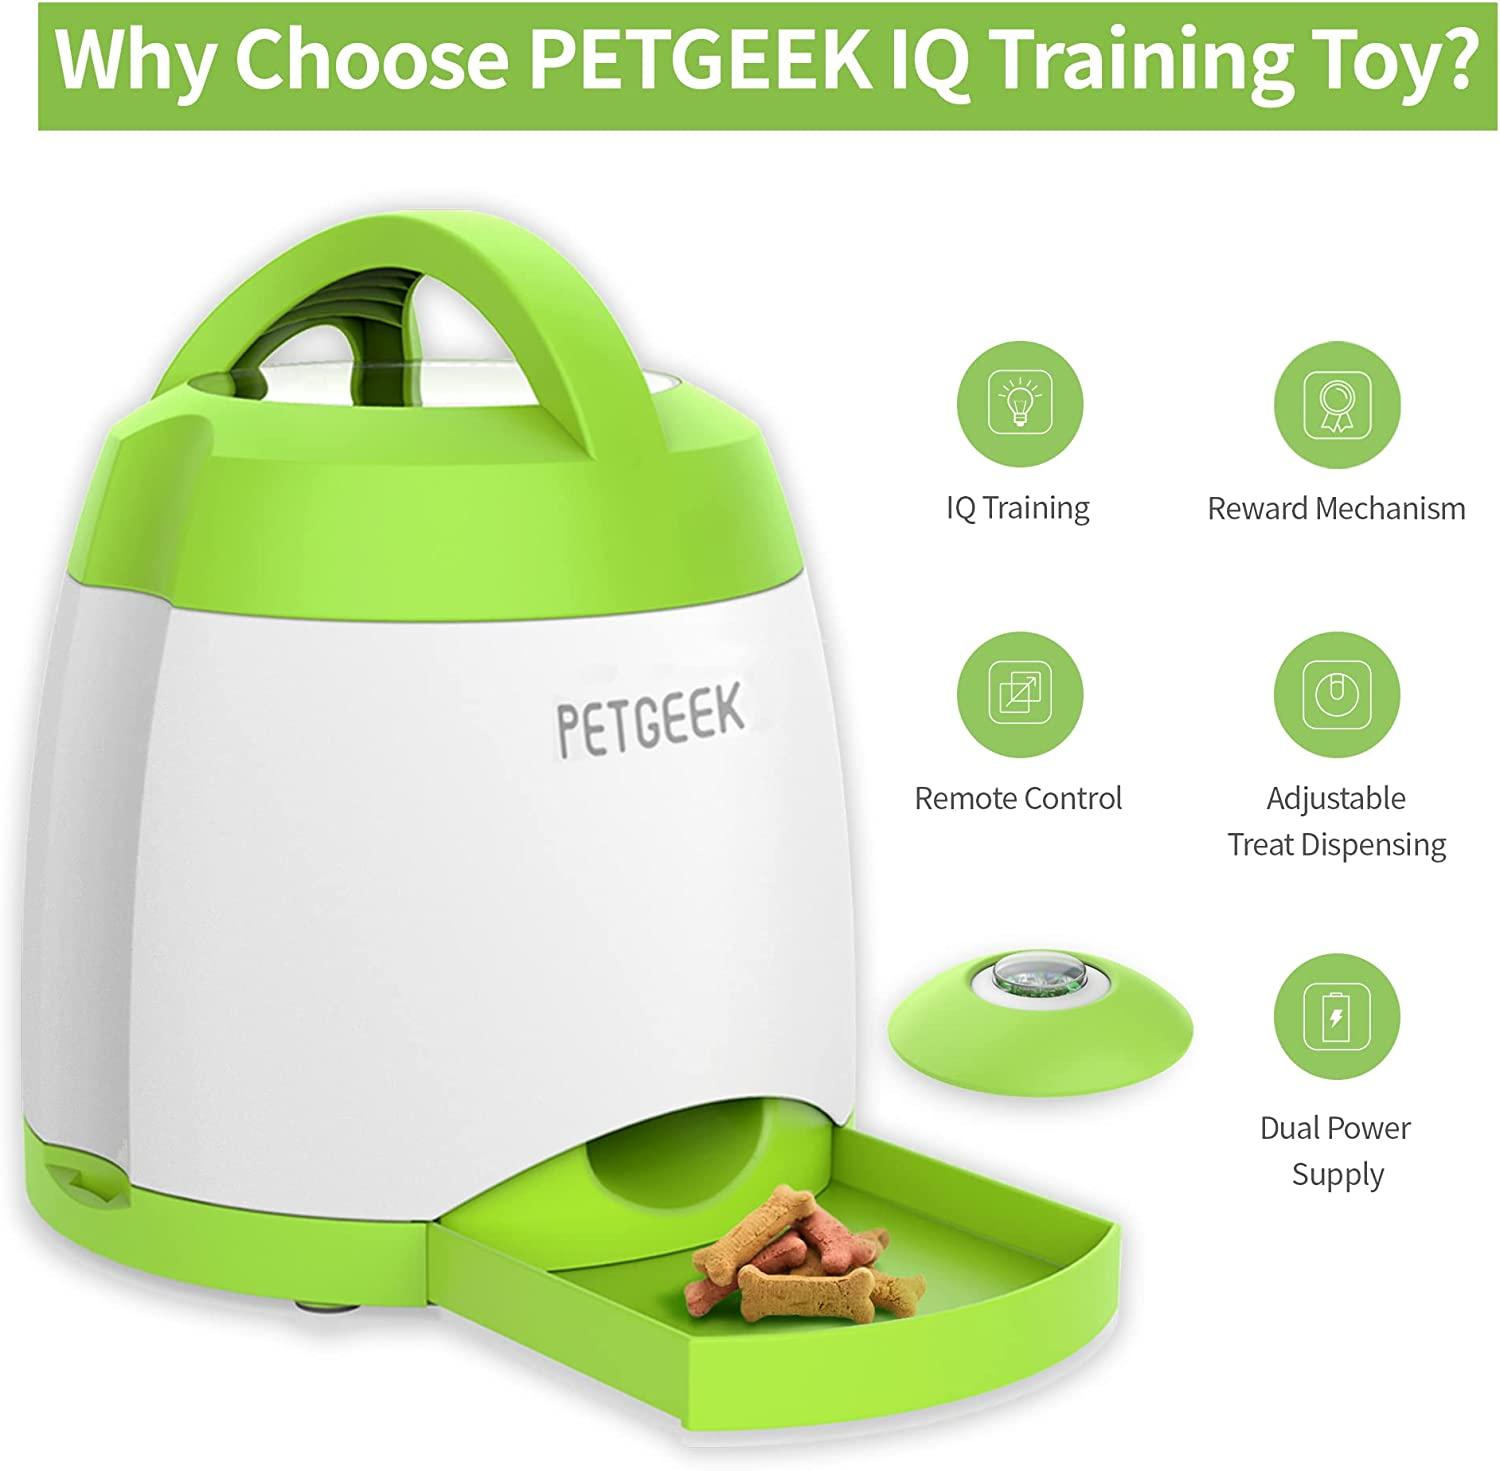 Pet Supplies : PETGEEK Automatic Dog Feeder Toy, Interactive Dog Puzzle  Toys Treat Dispensing, Electronic Dog Food Dispenser Remote Control, Safe  ABS Material Pet Toy for All Breeds of Dogs, Blue Color 